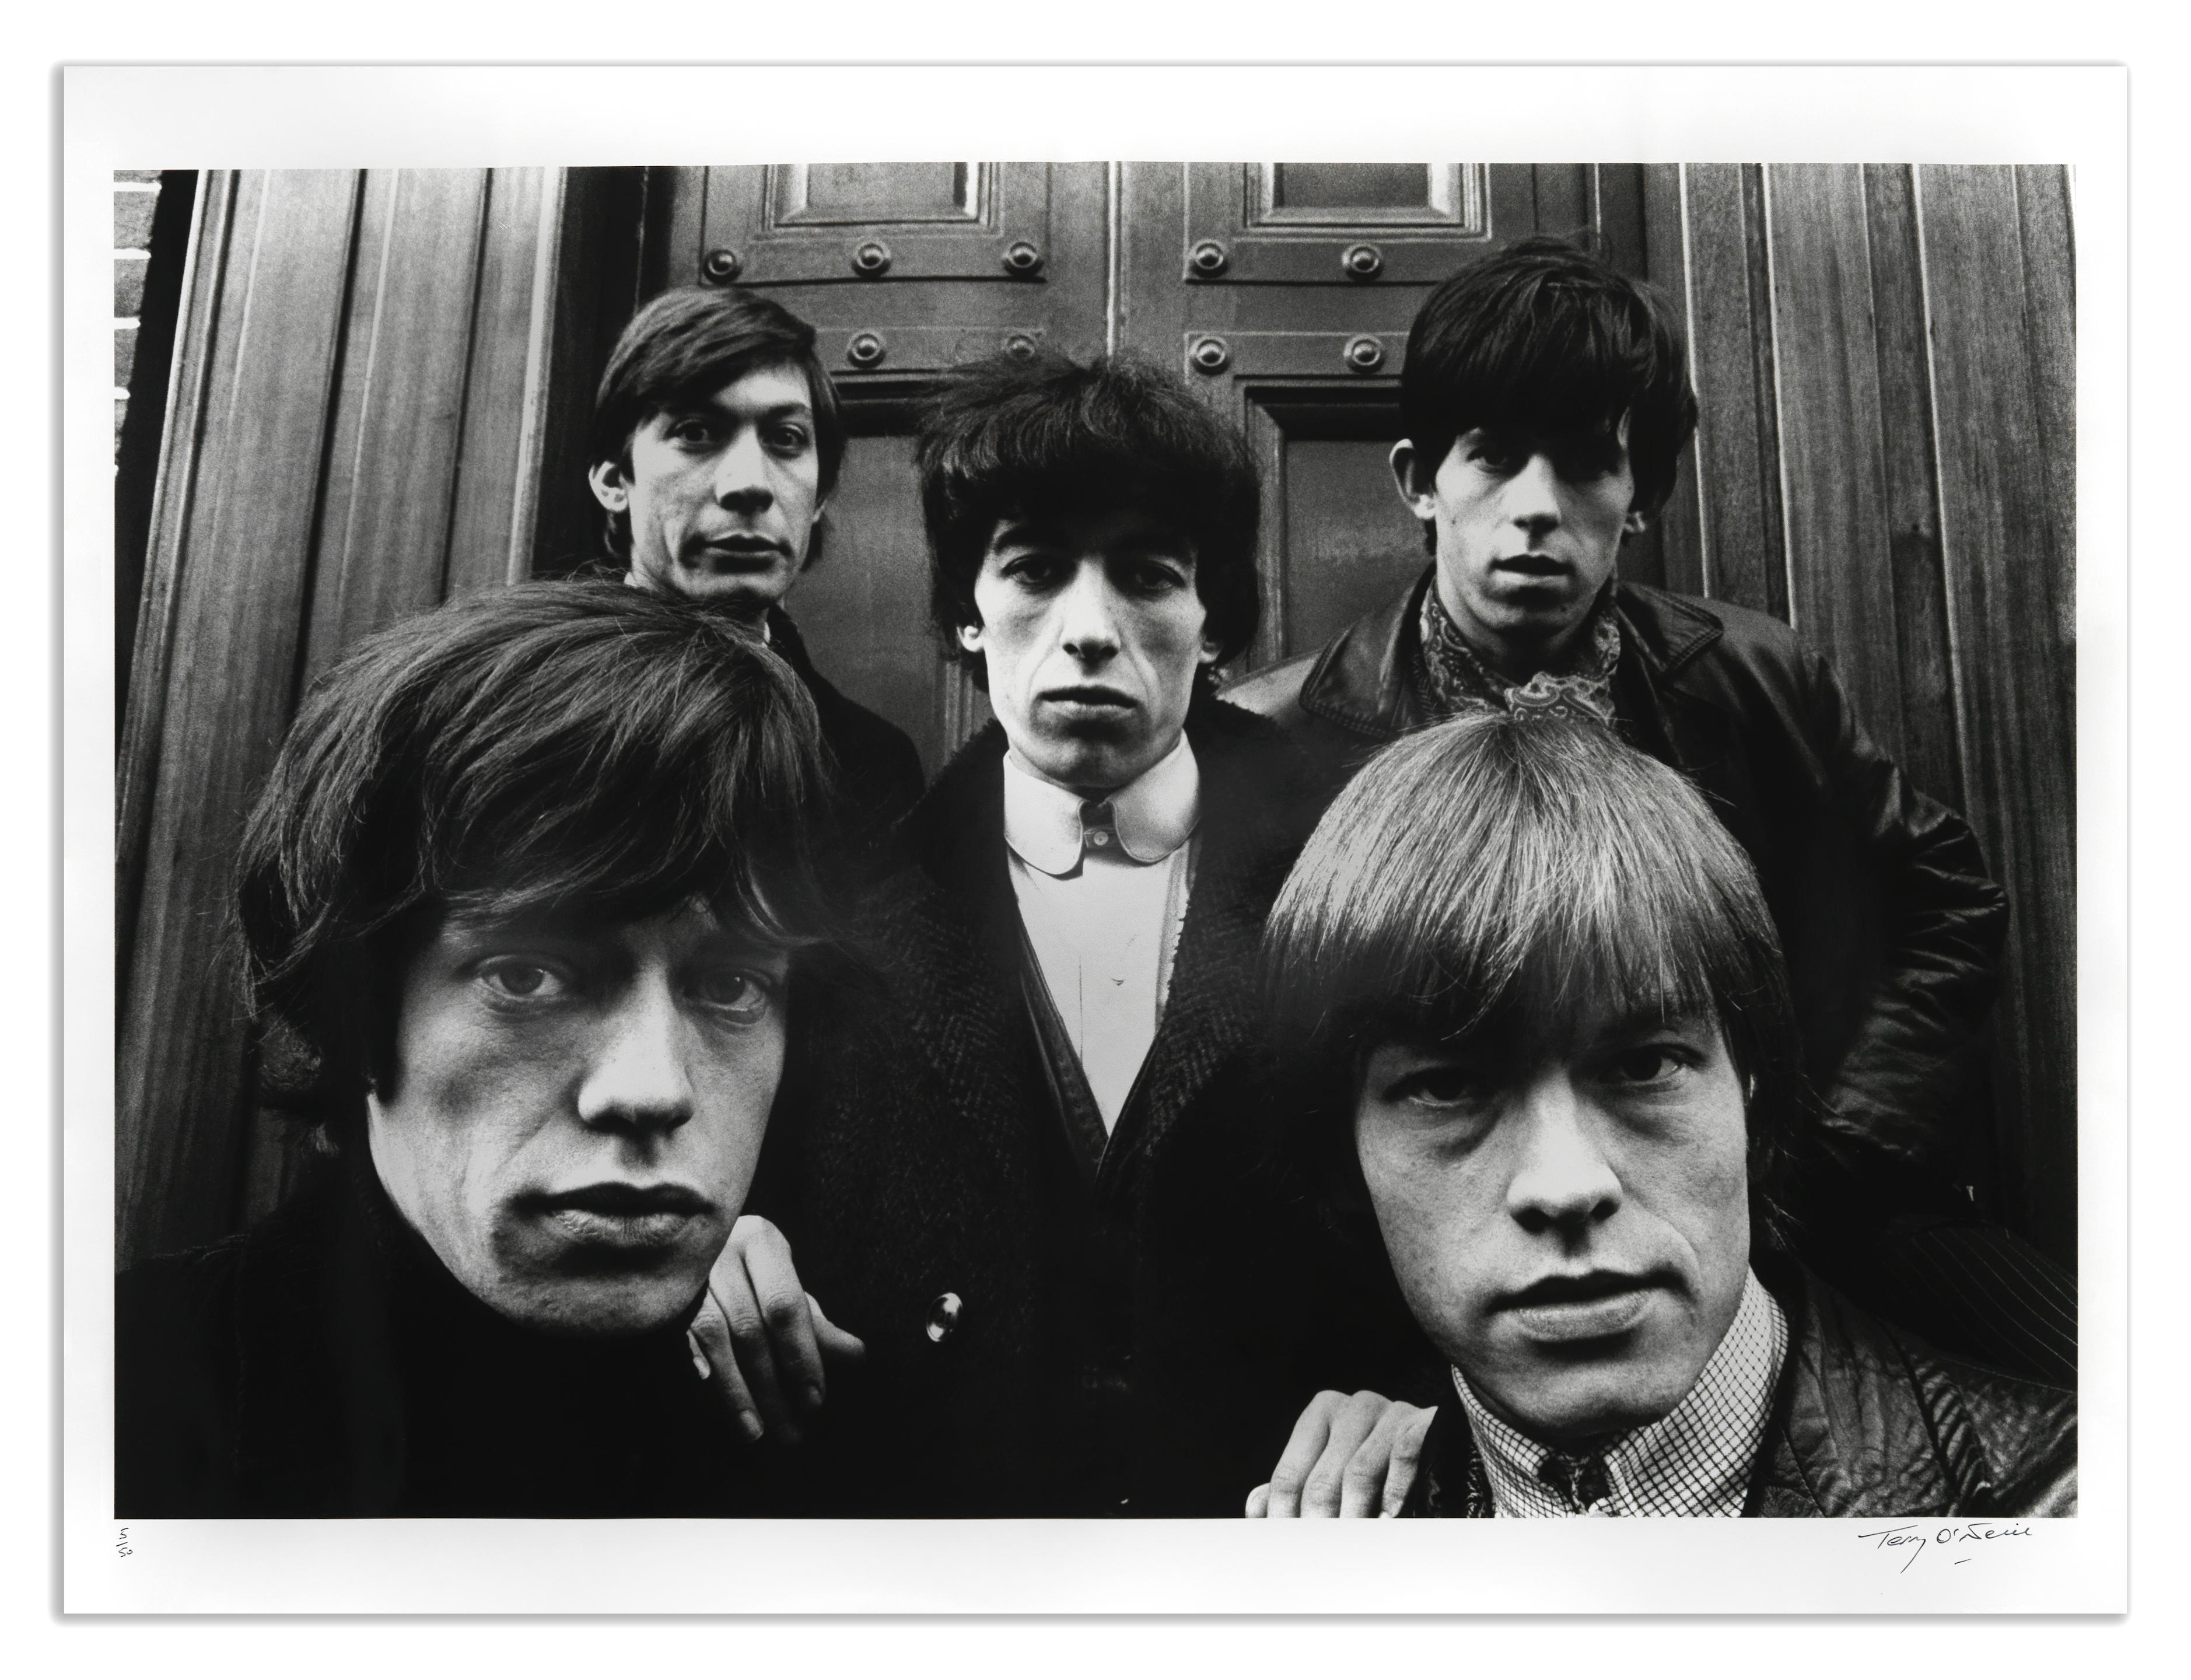 Rolling stones song stoned. Rolling Stones portrait book.